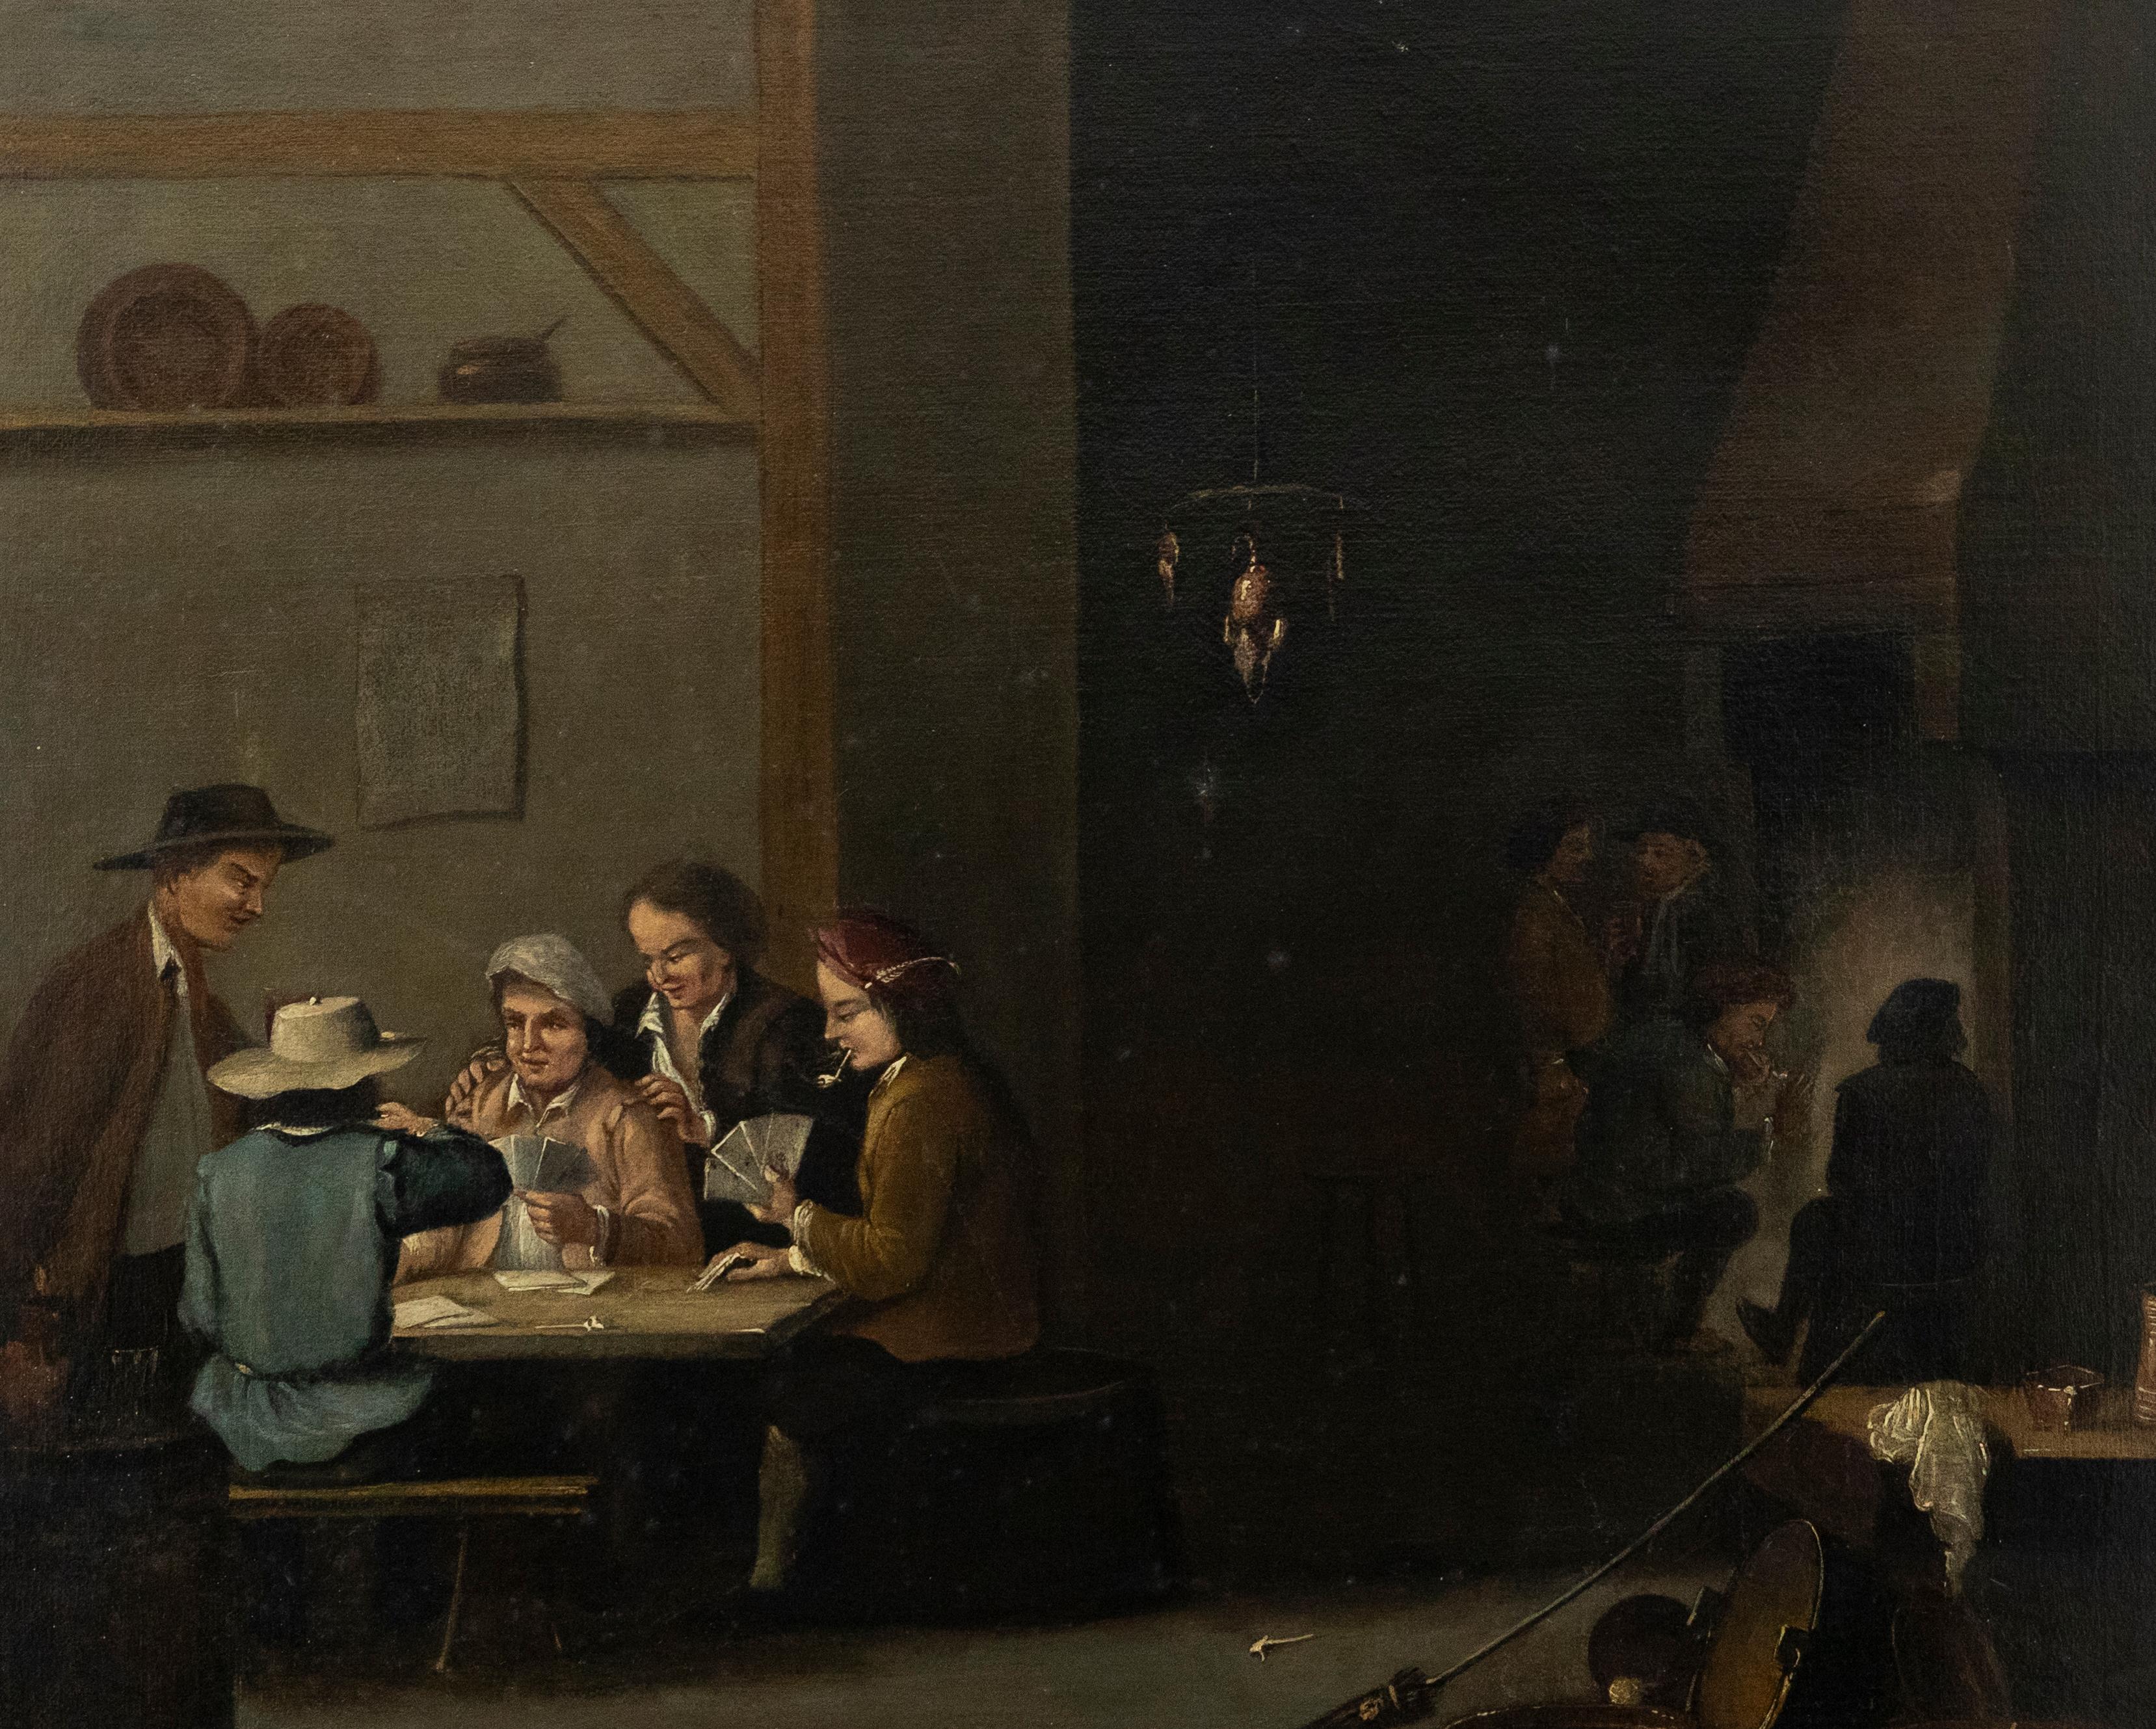 Unknown Figurative Painting - After David Teniers the Younger (1610-1690) - 19th Century Oil, Tavern Scene